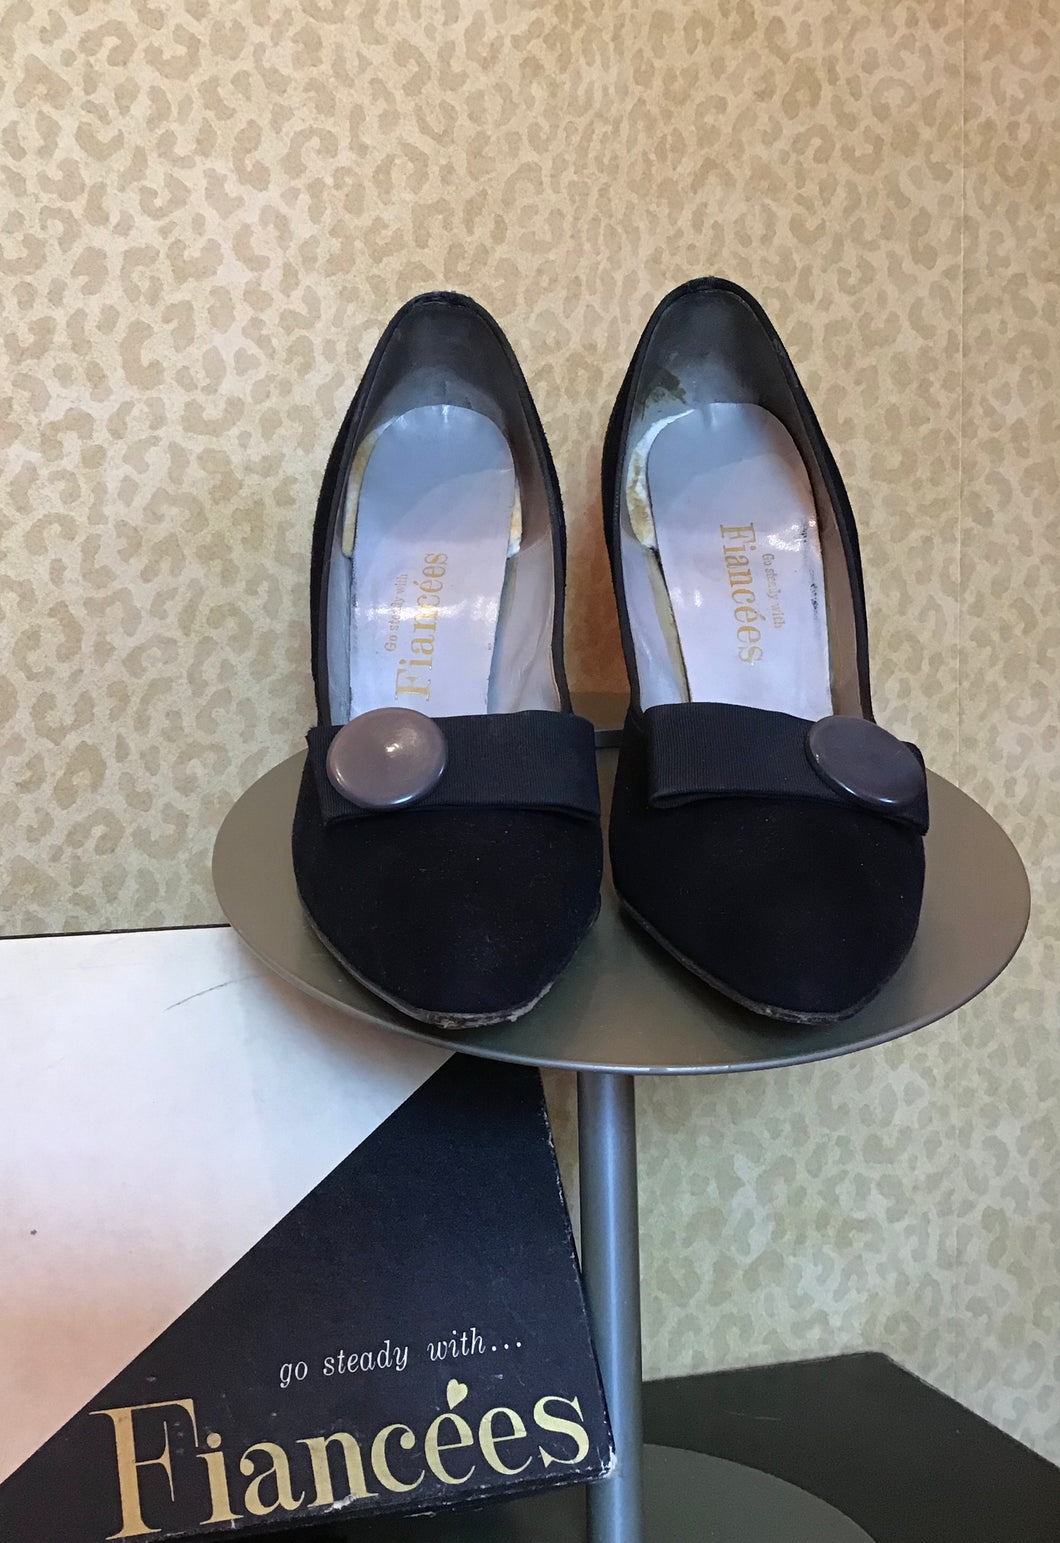 Fiancées Black Heels with Button and Bow